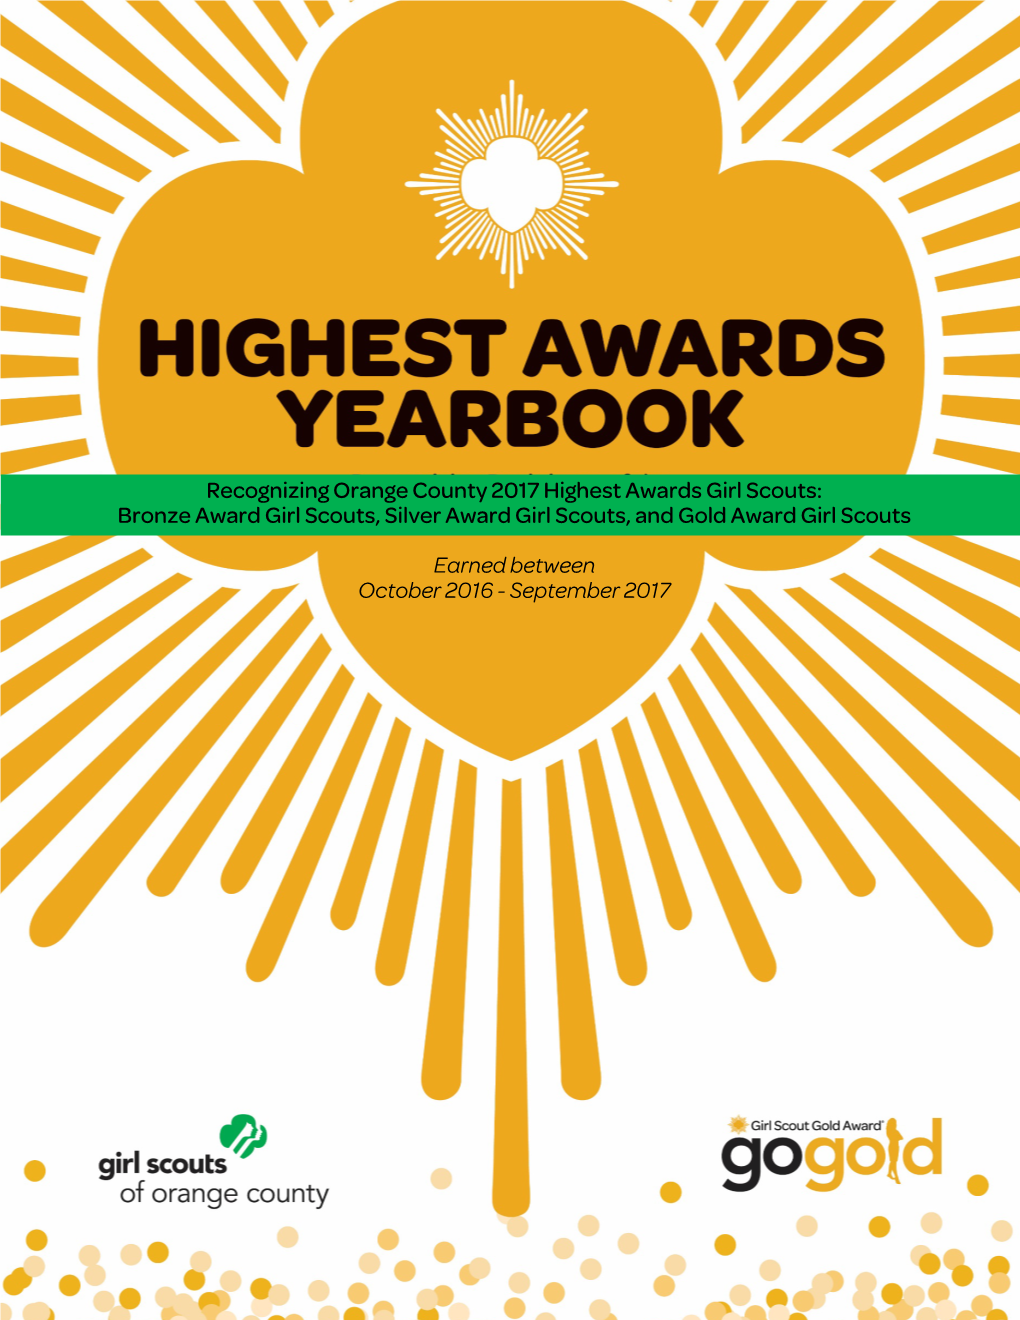 2017 GSOC Gold Award Girl Scout Yearbook